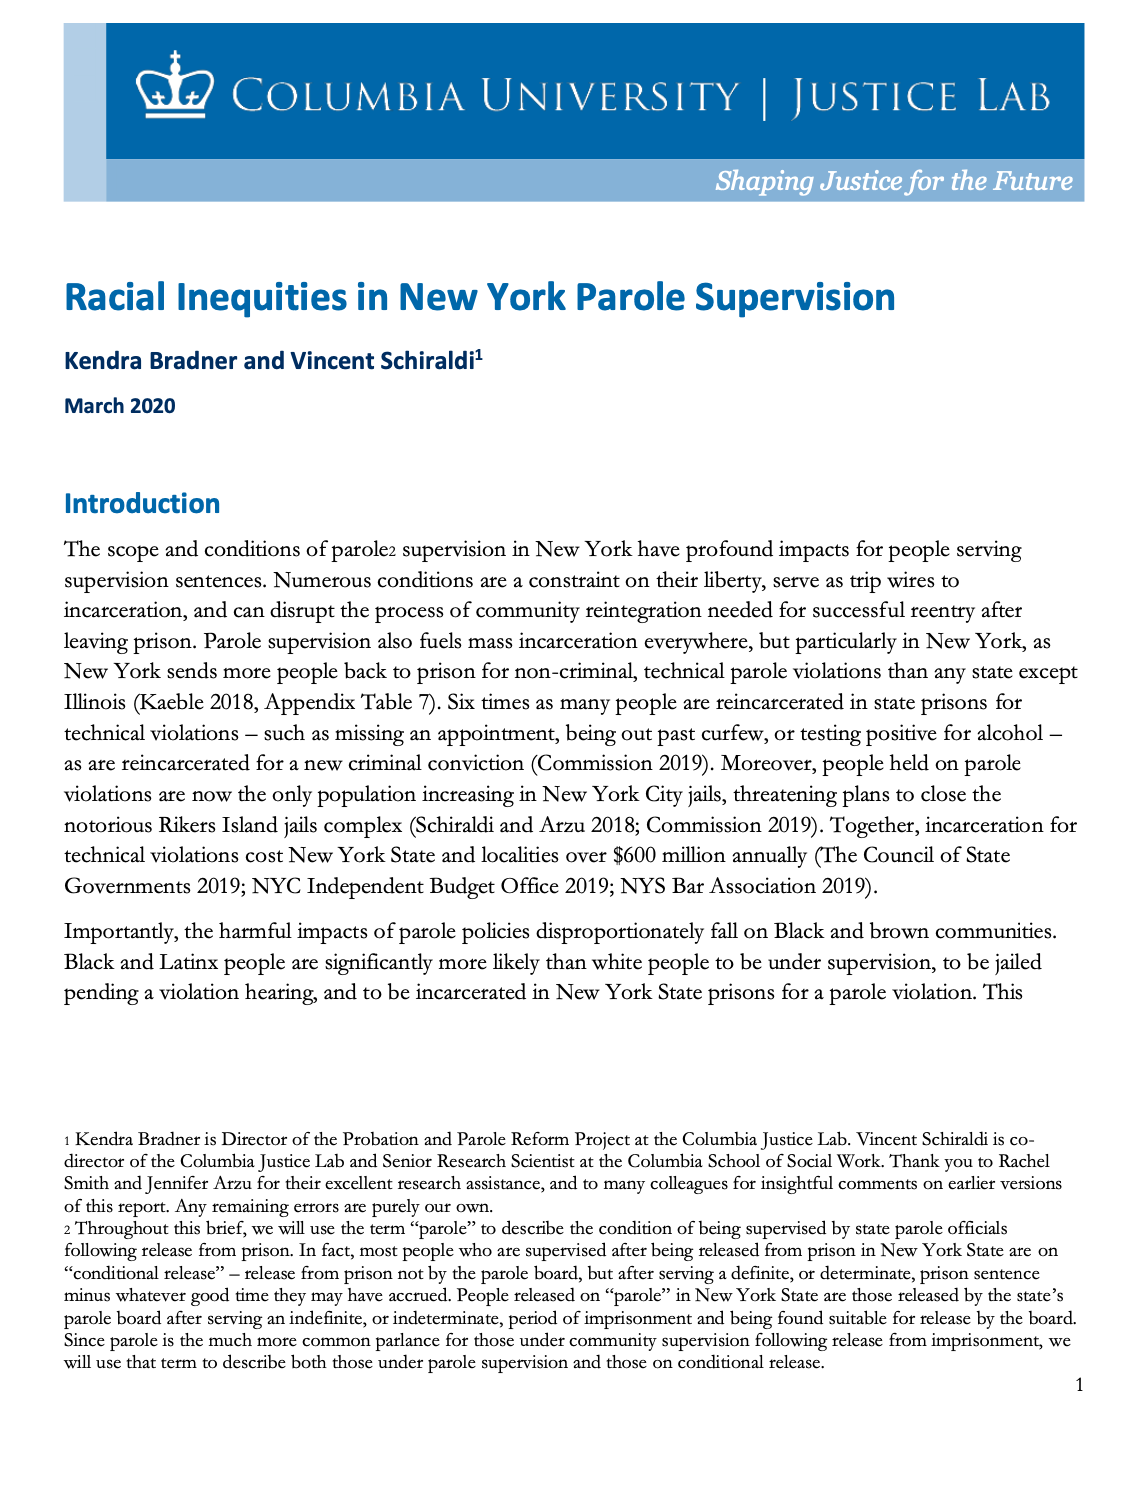 Racial Inequities in New York Parole Supervision